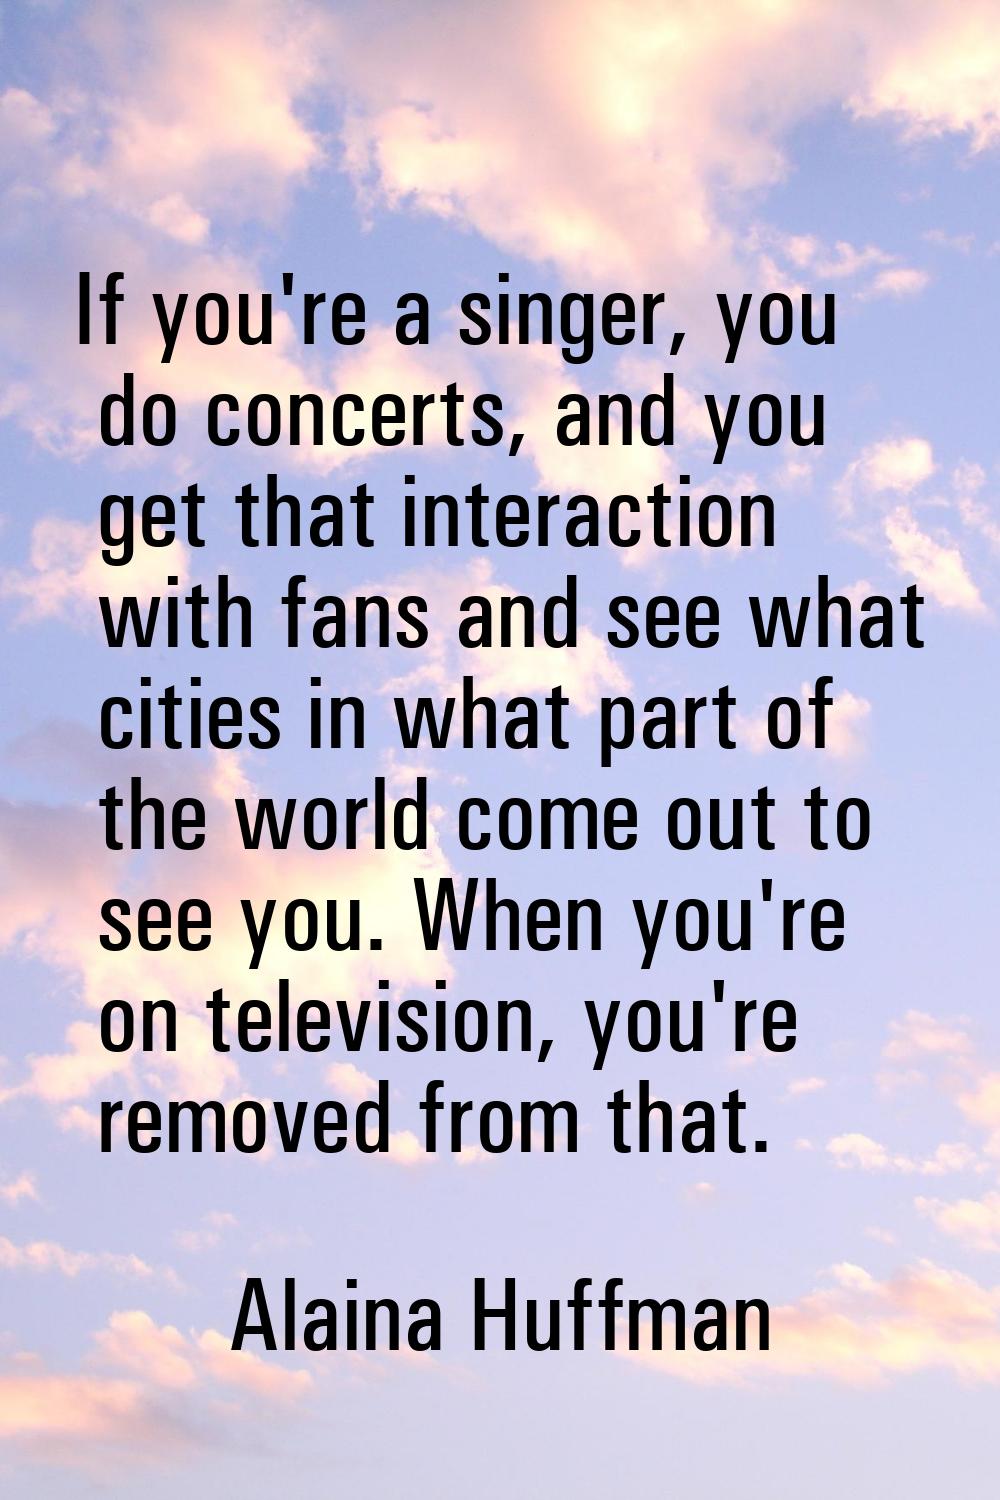 If you're a singer, you do concerts, and you get that interaction with fans and see what cities in 